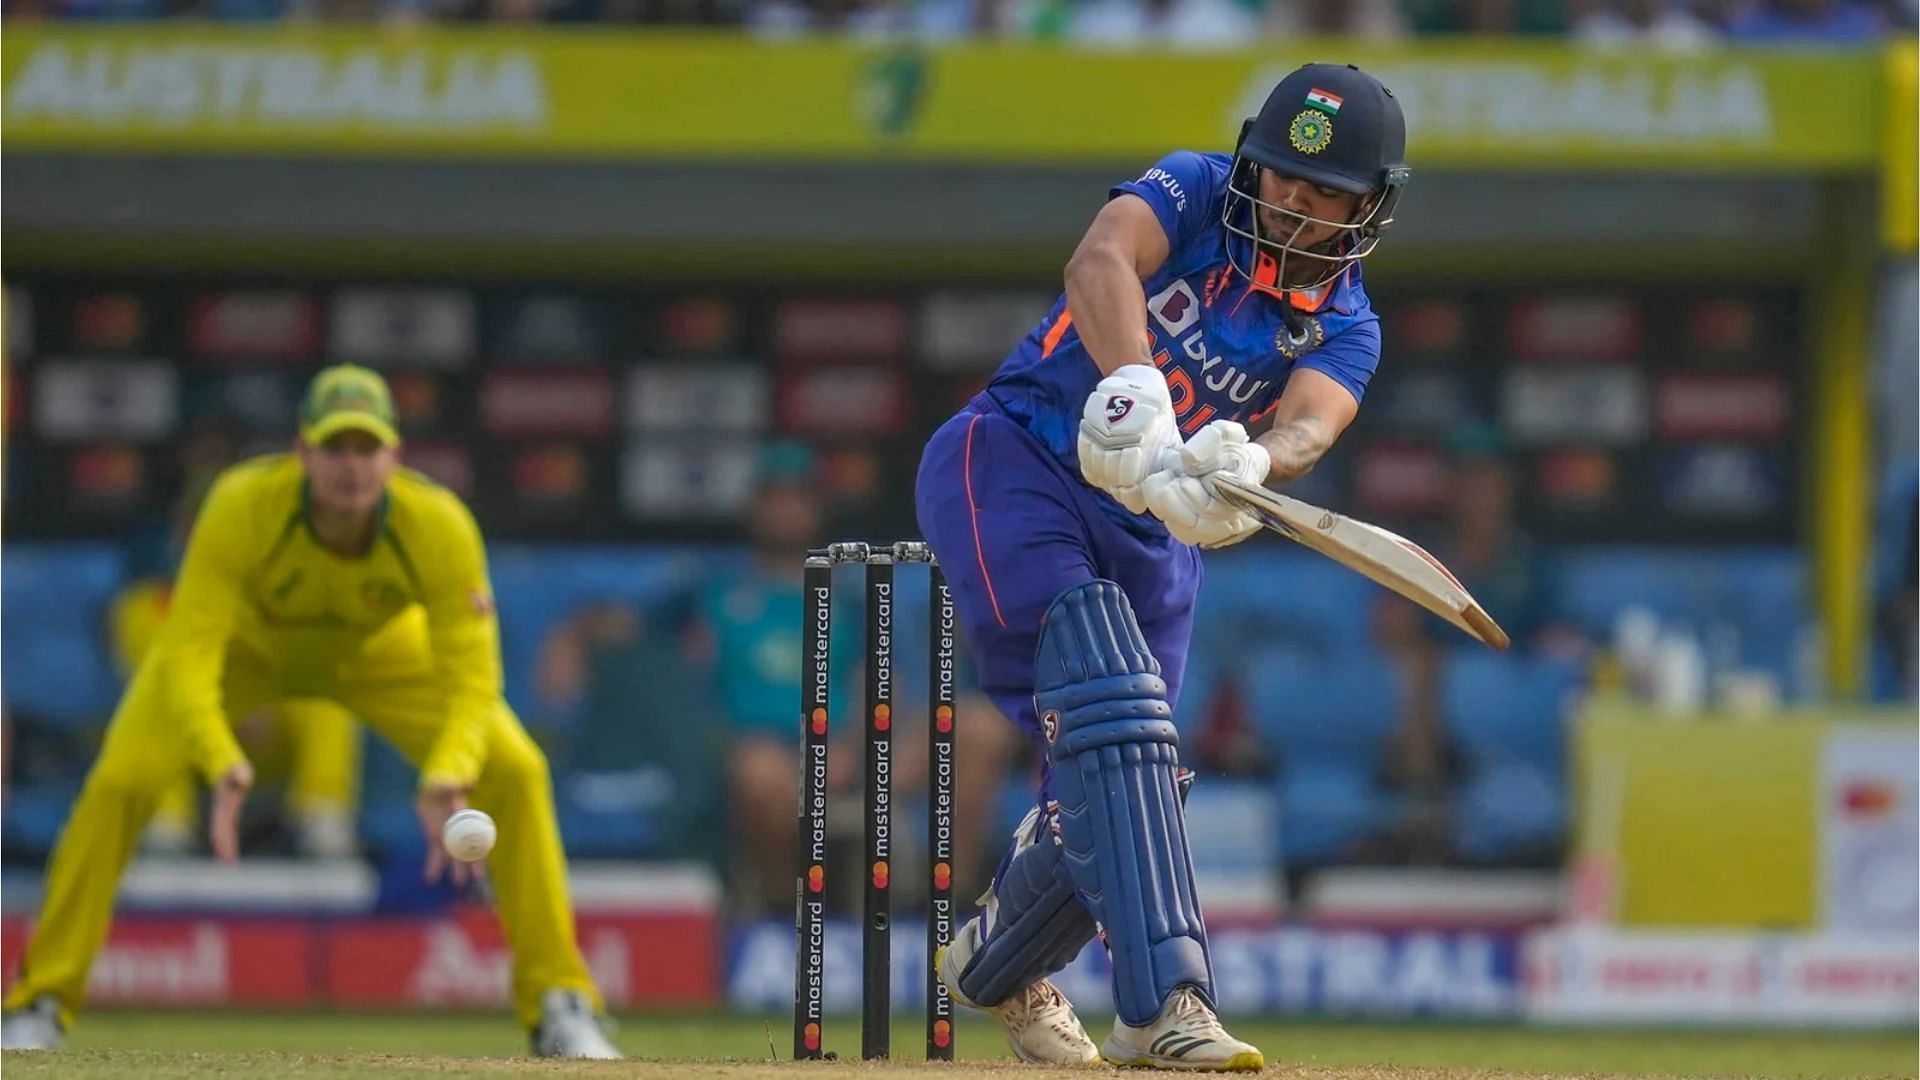 Ishan Kishan could well be the highest-scoring player in this match.